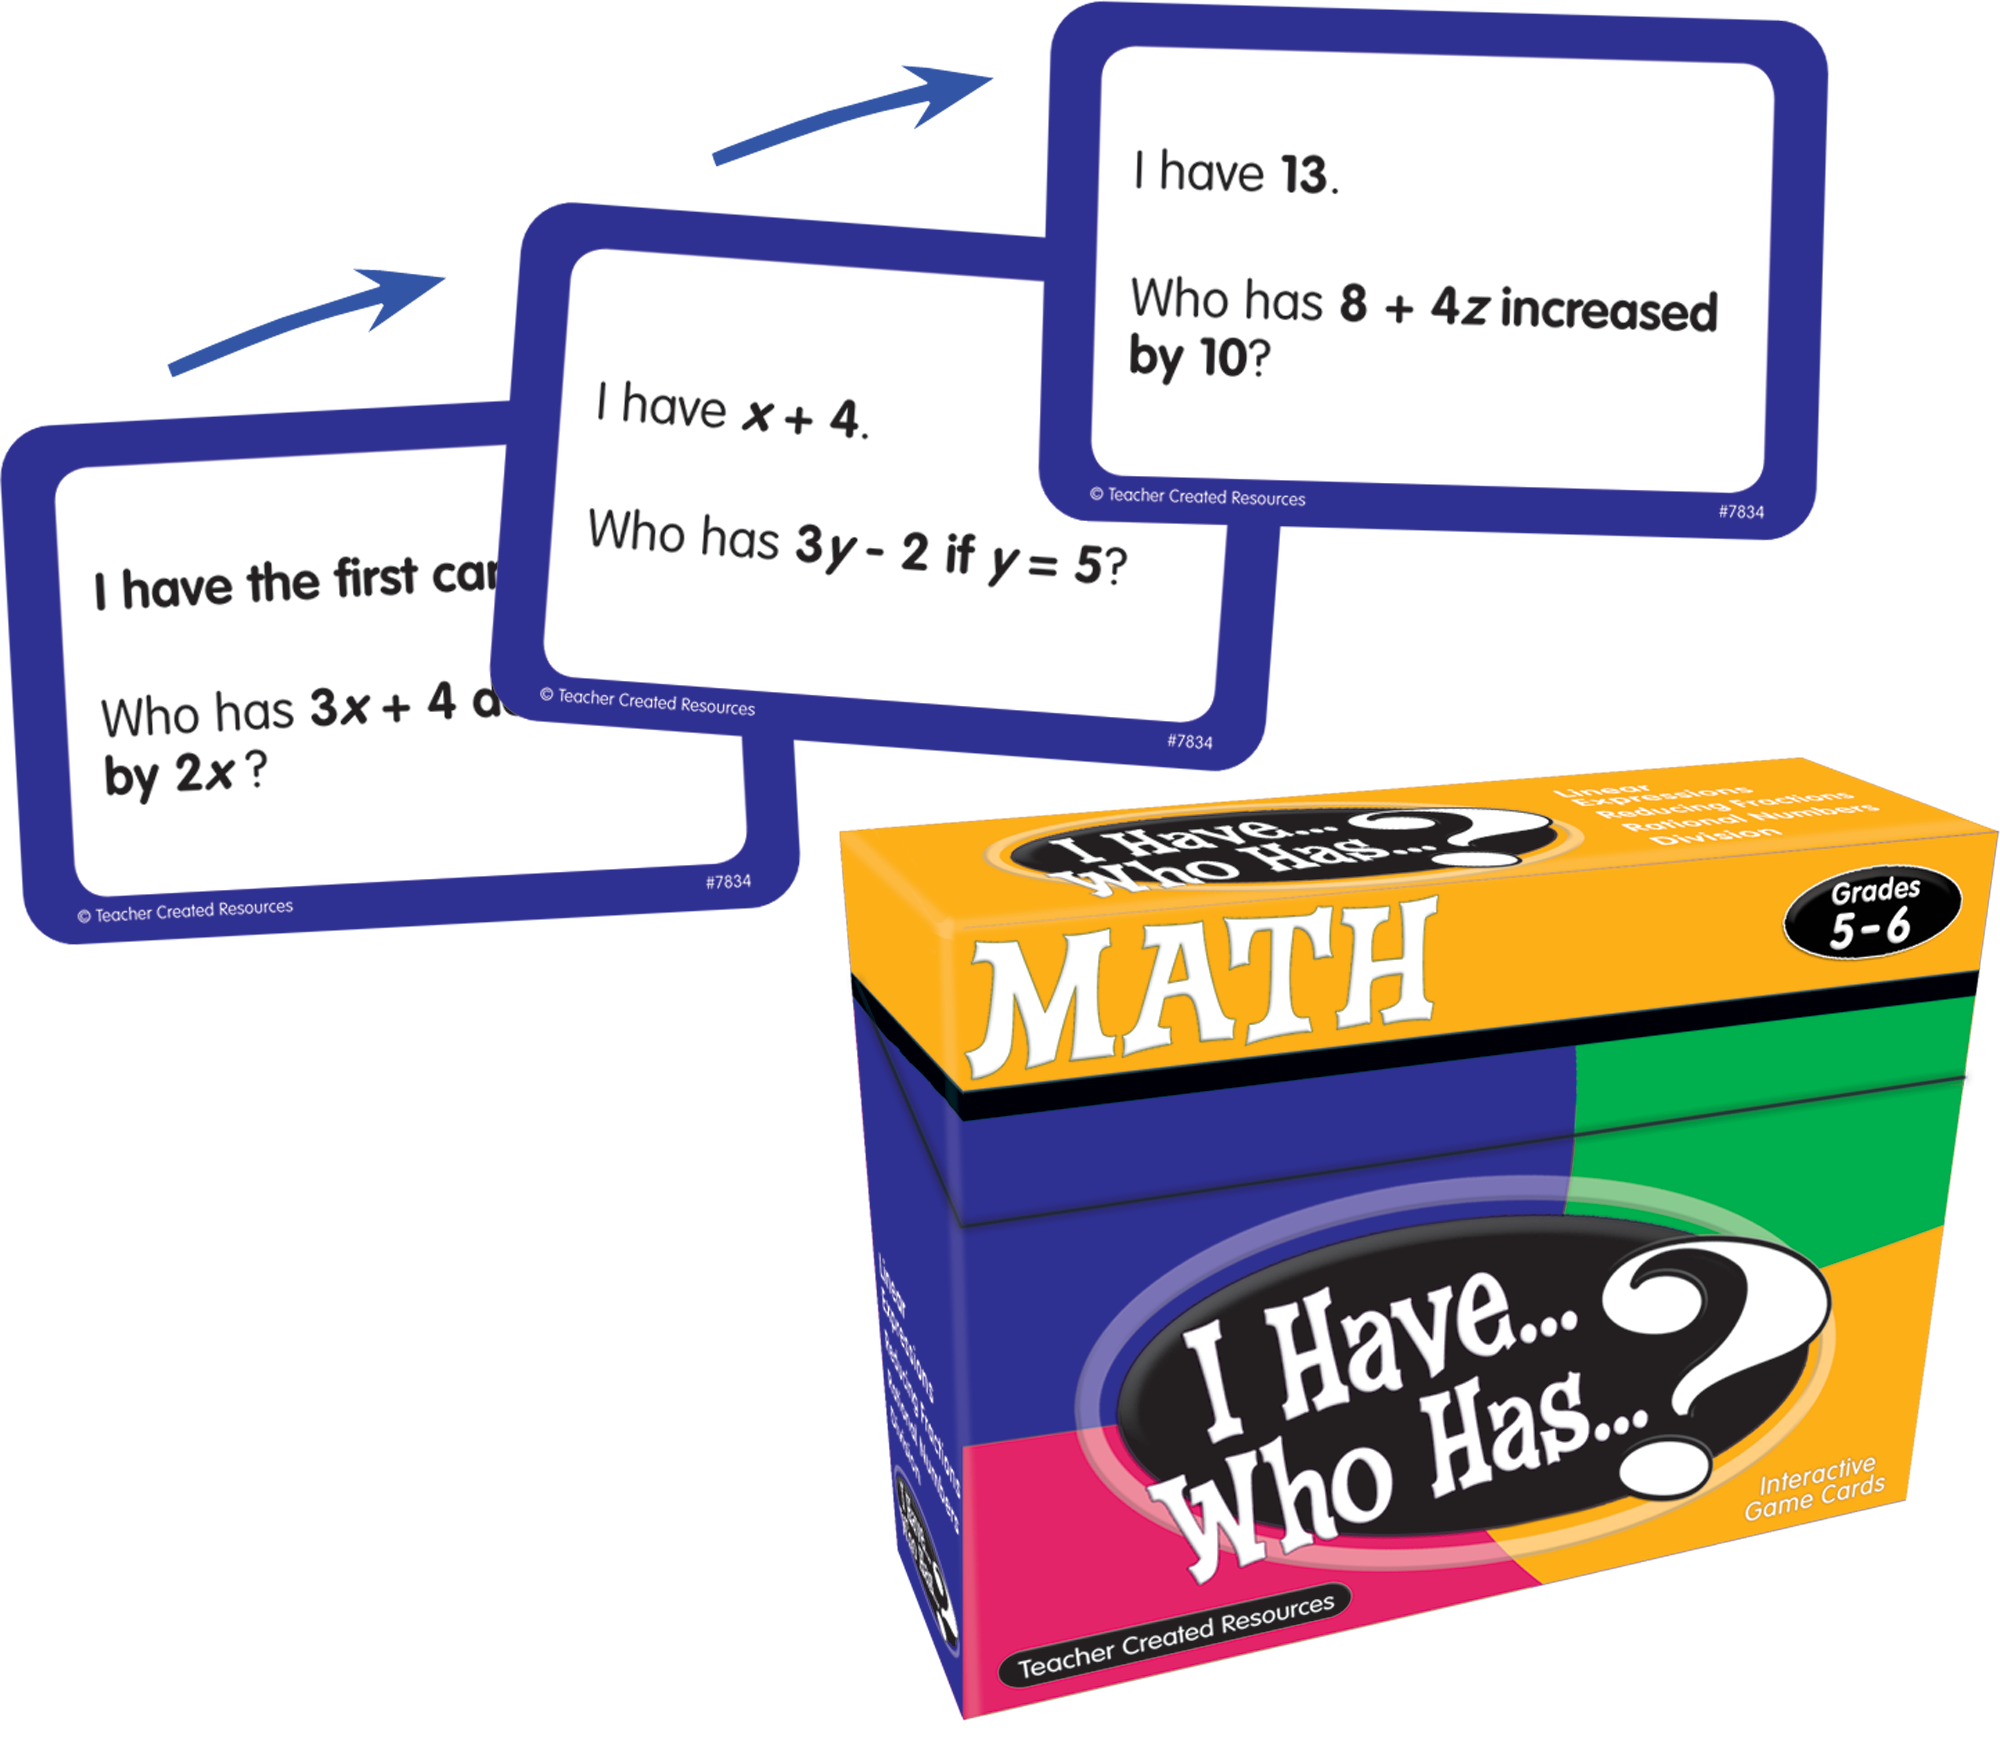 I Have... Who Has...? Math Game (Gr. 5â€“6)